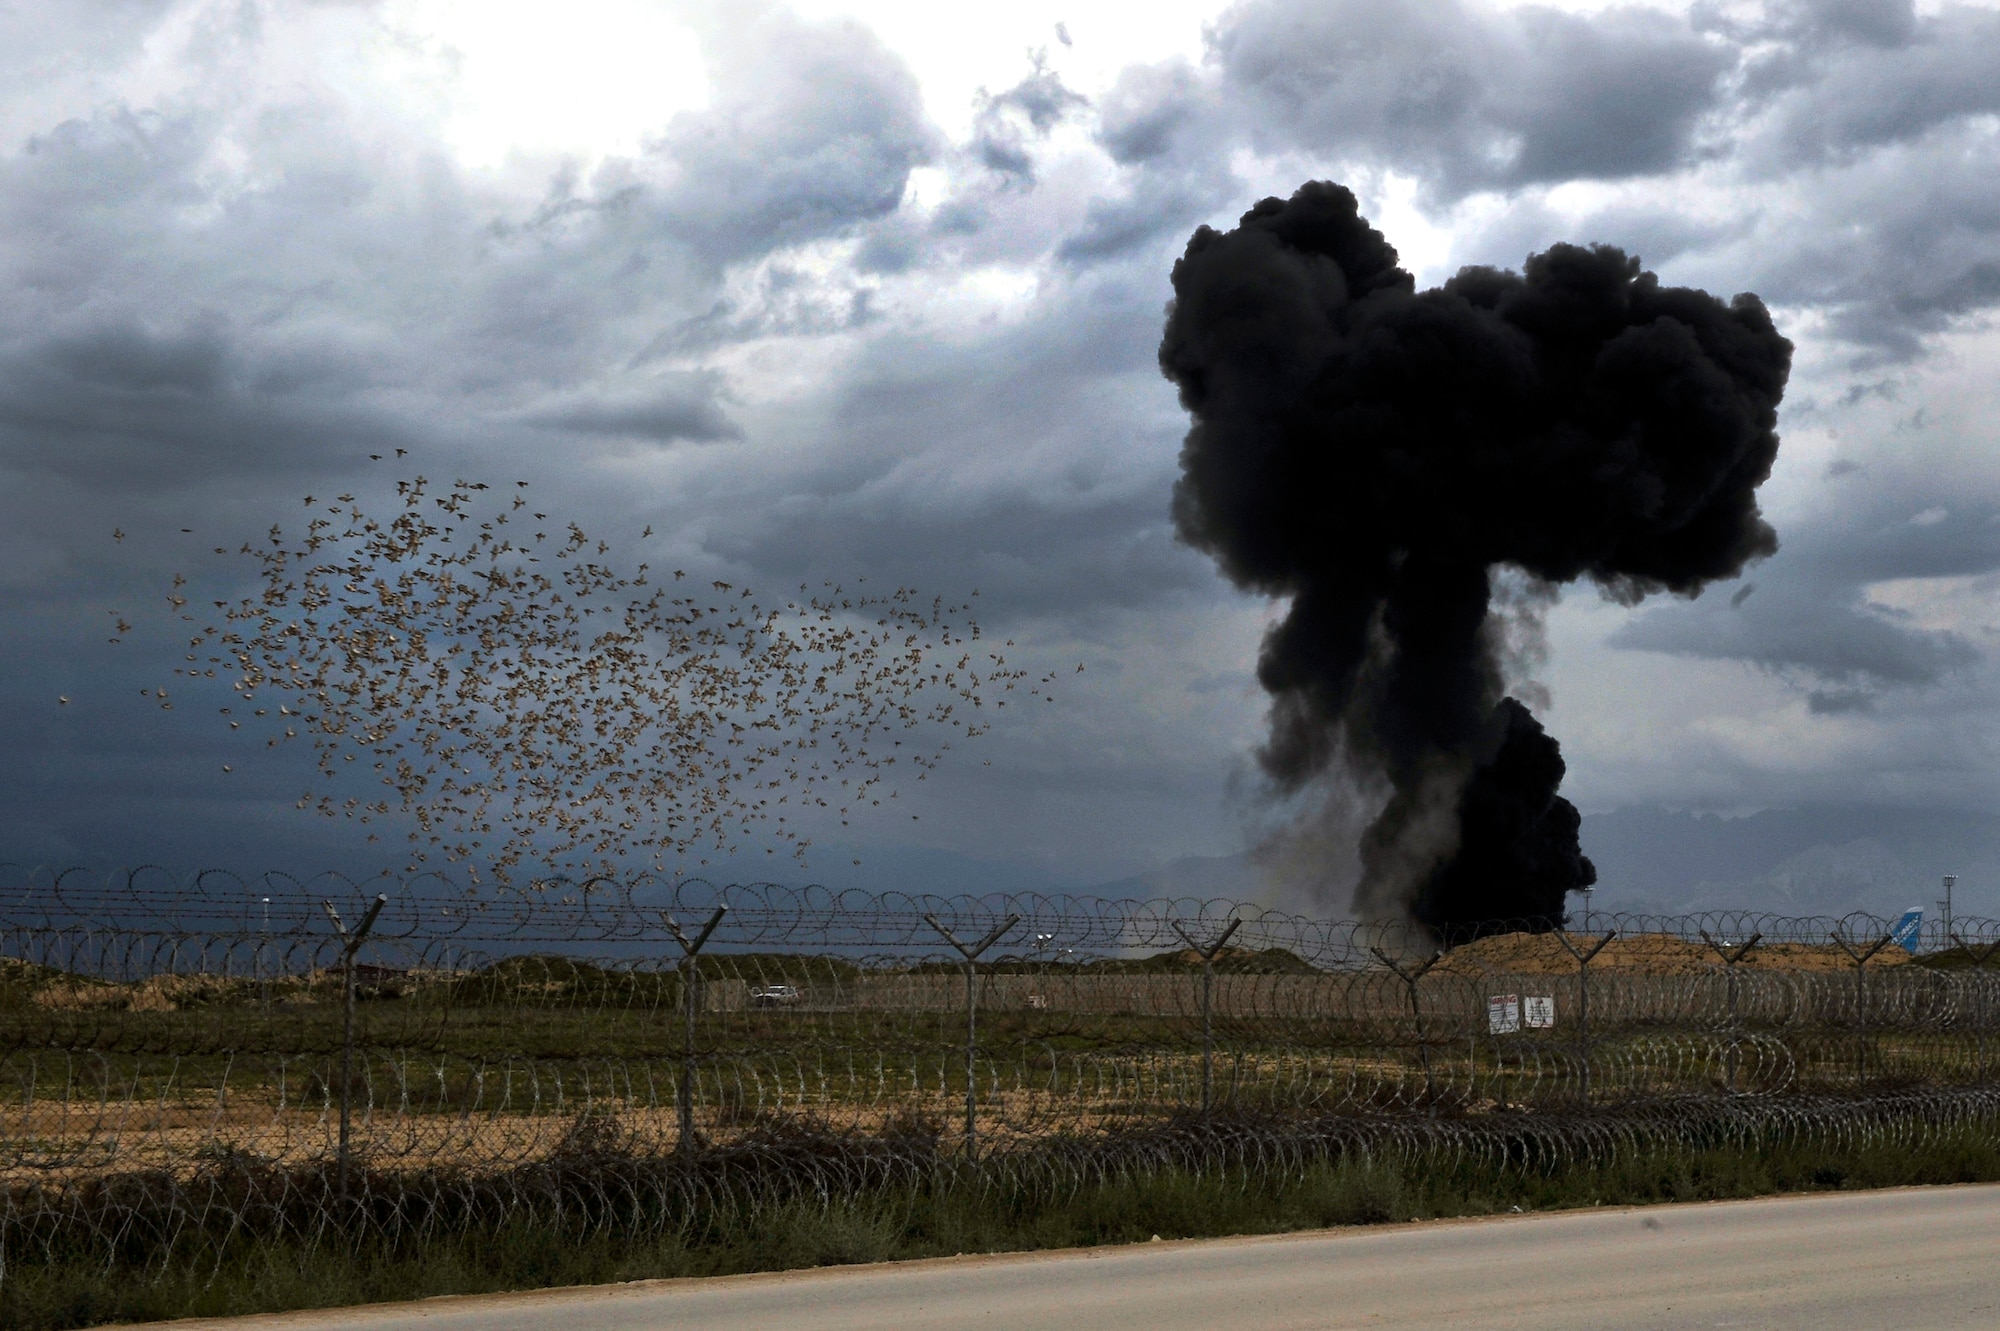 A National Air Cargo Boeing 747 airliner, with a seven-person crew and cargo consisting of five military vehicles, crashed shortly after takeoff from Bagram Airfield, Afghanistan, April 29, 2013. The aircraft erupted into flames near the end of the runway within the perimeter of the airfield, all seven crew members perished in the crash.  (U.S. Air Force photo/Senior Airman Chris Willis)